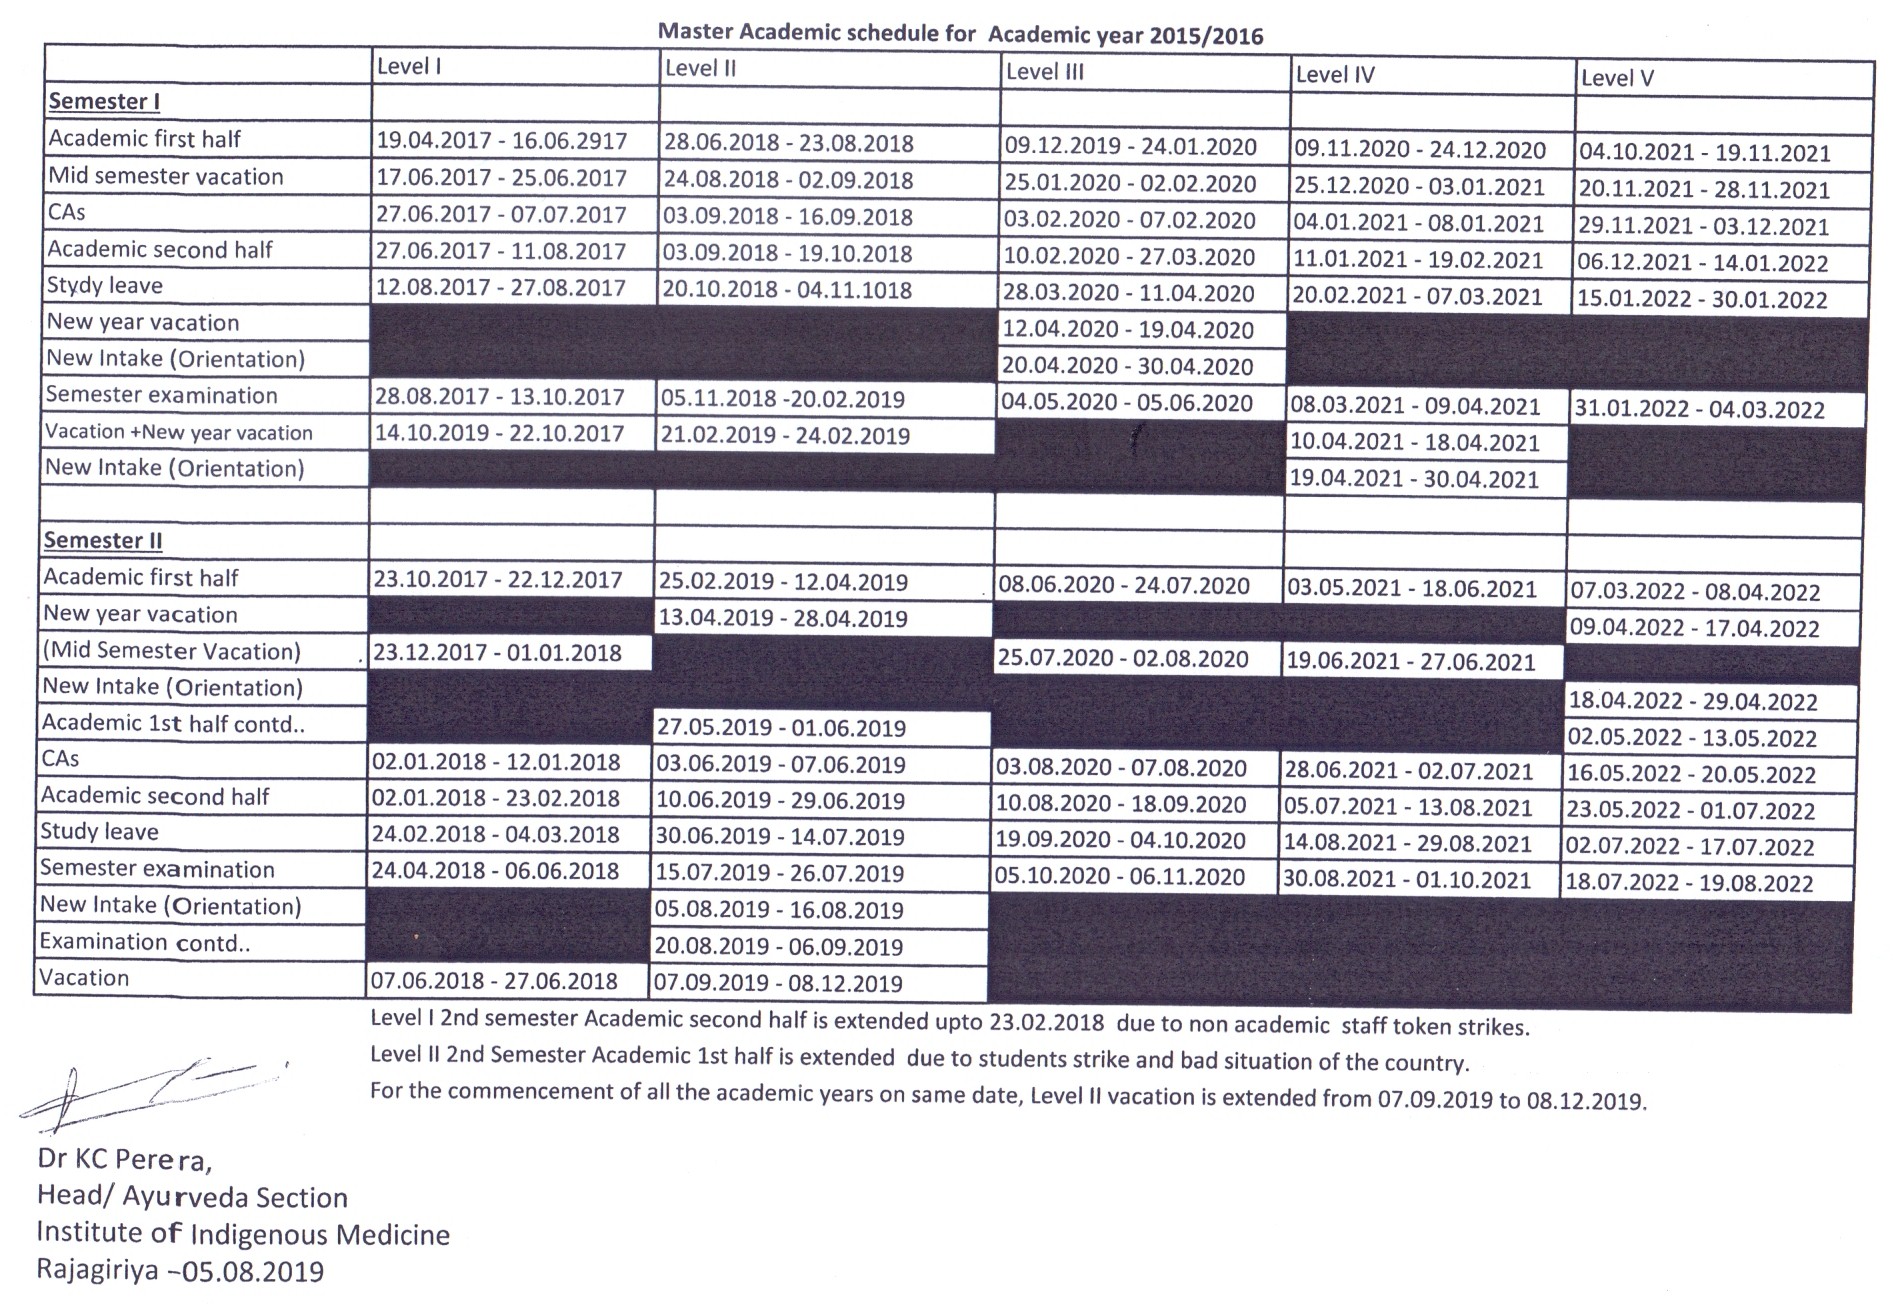 Master Academic Schedule For Academic Year 2015/2016 Faculty of